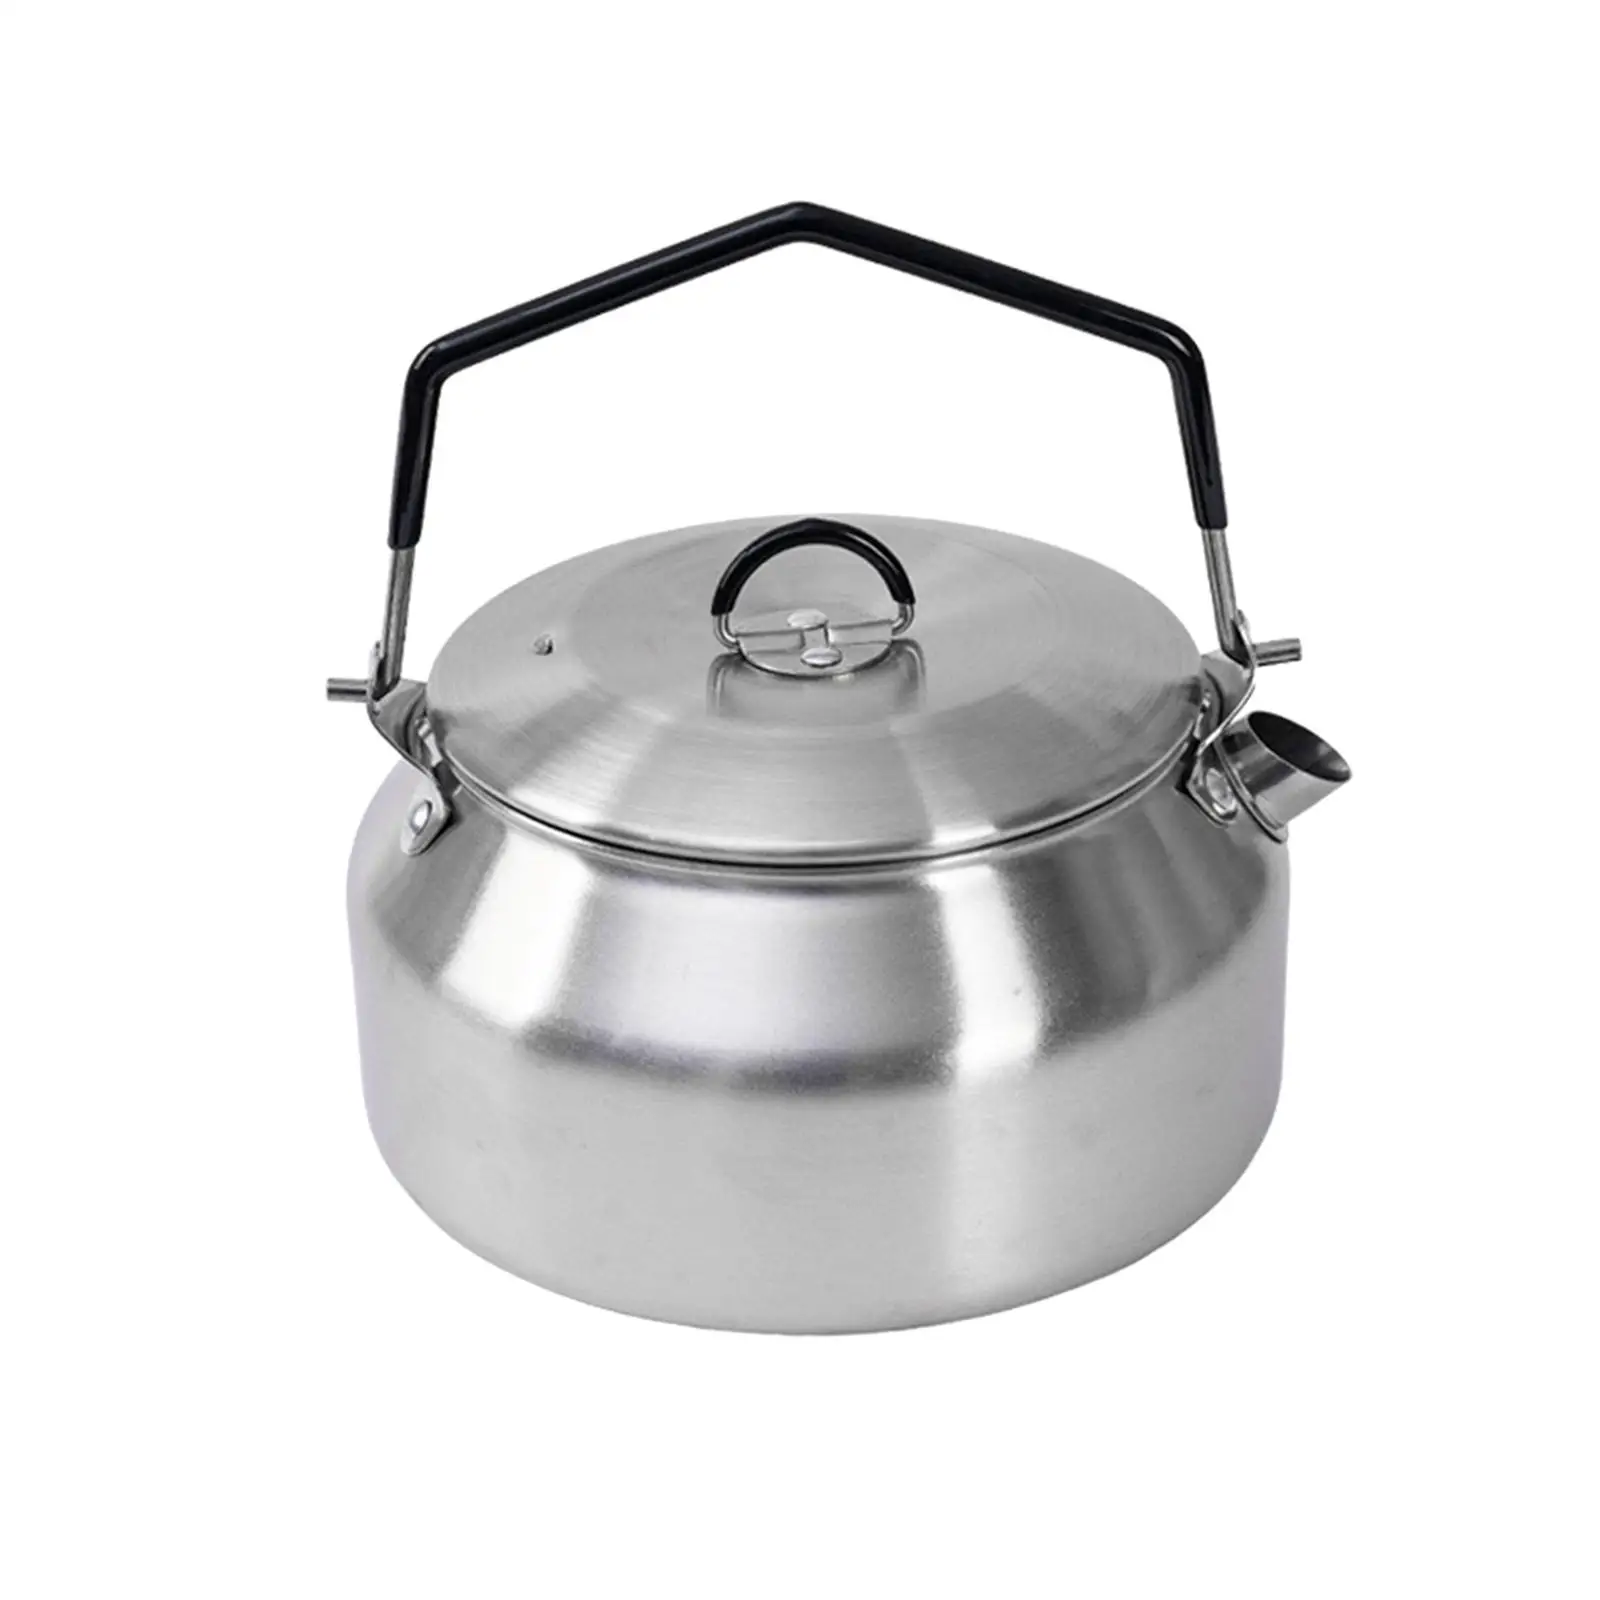 Camping Water Kettle Teapot Kitchen Stainless Steel Pot Lightweight Tea Pot for Barbecue Backpacking Outdoor Hiking Fishing